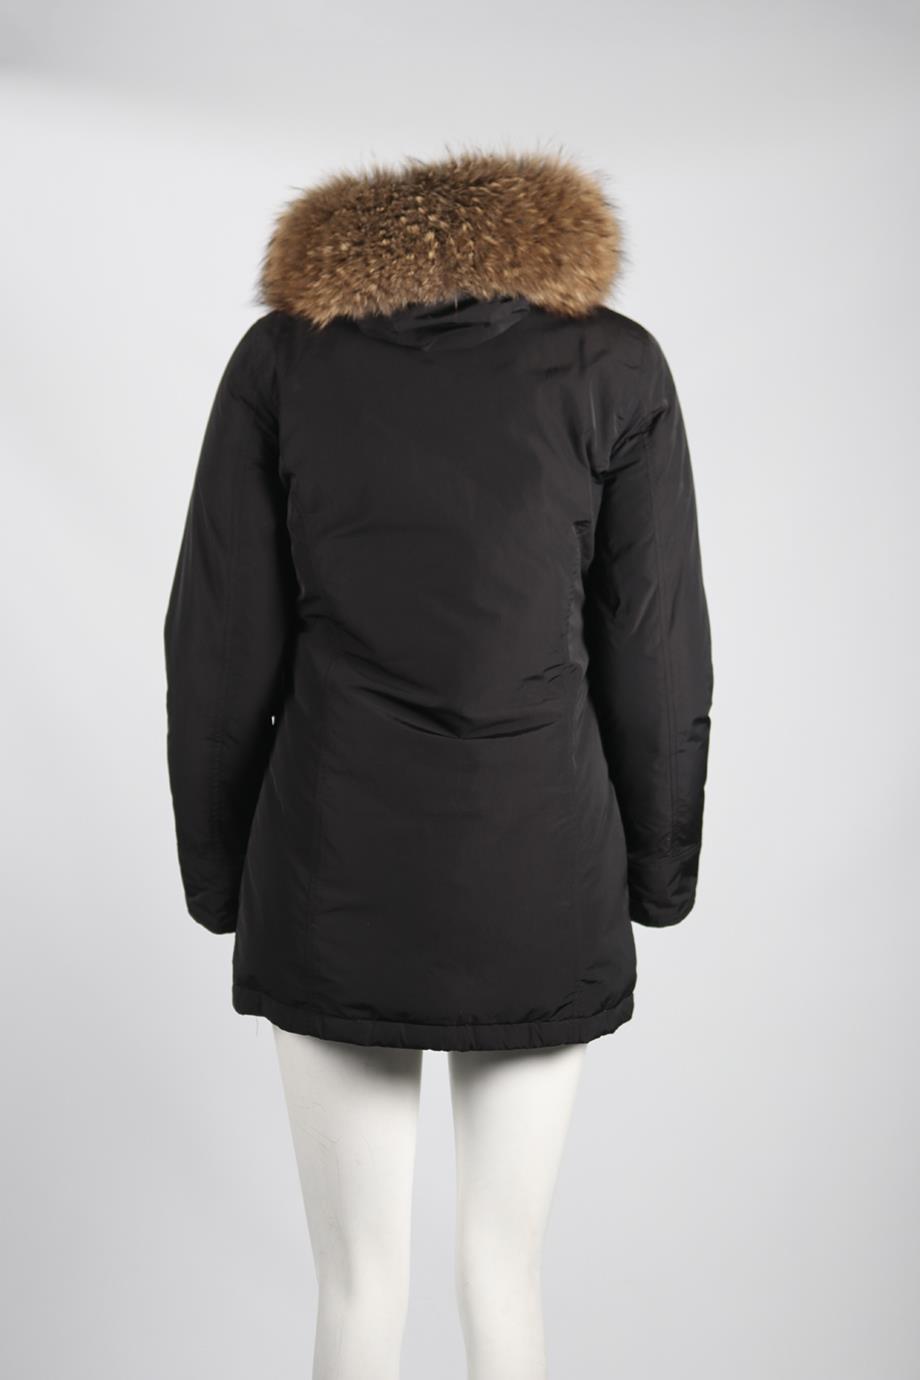 WOOLRICH RACOON FUR AND SHELL DOWN COAT MEDIUM